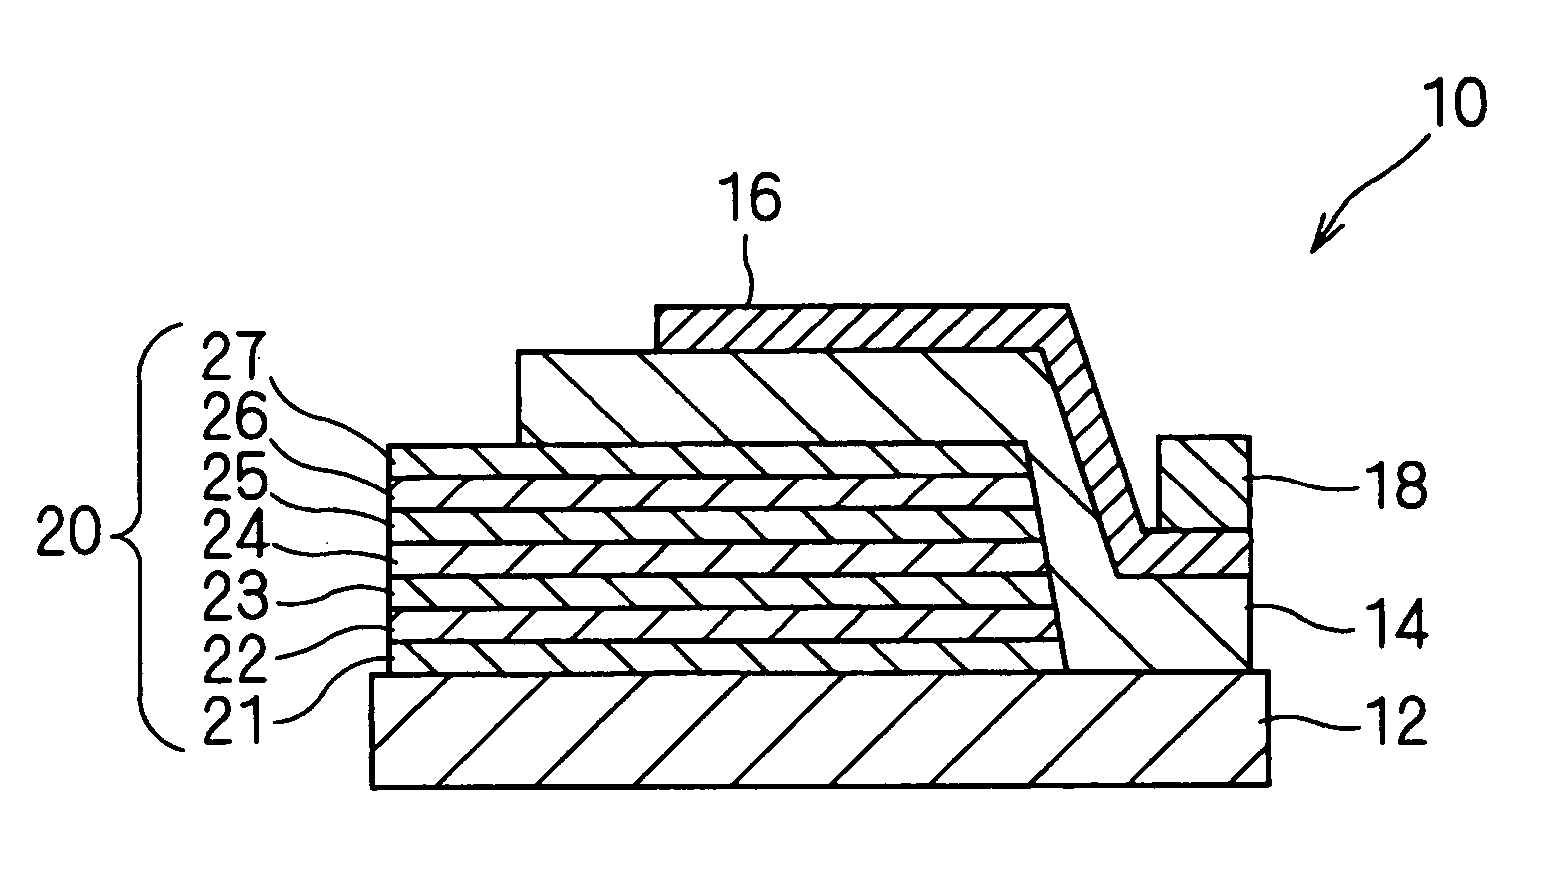 Piezoelectric thin-film resonator and process for producing same